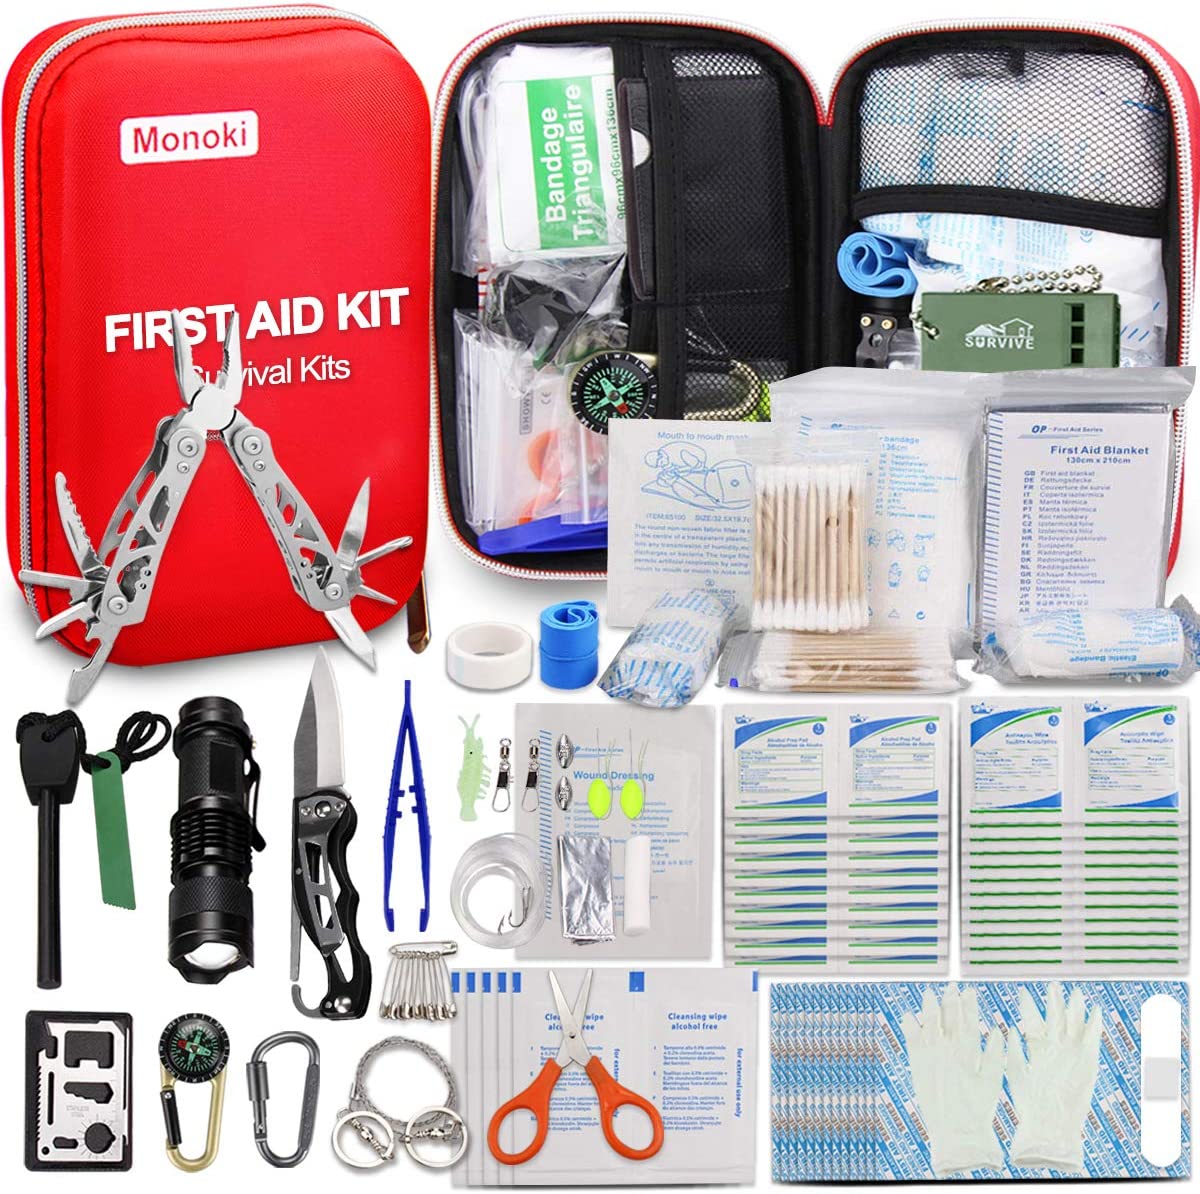 Monoki First Aid Kit Survival Kit, 241Pcs Upgraded Outdoor Emergency Survival Kit Gear – Safety First Aid Kit for Home Office Car Boat Camping Hiking